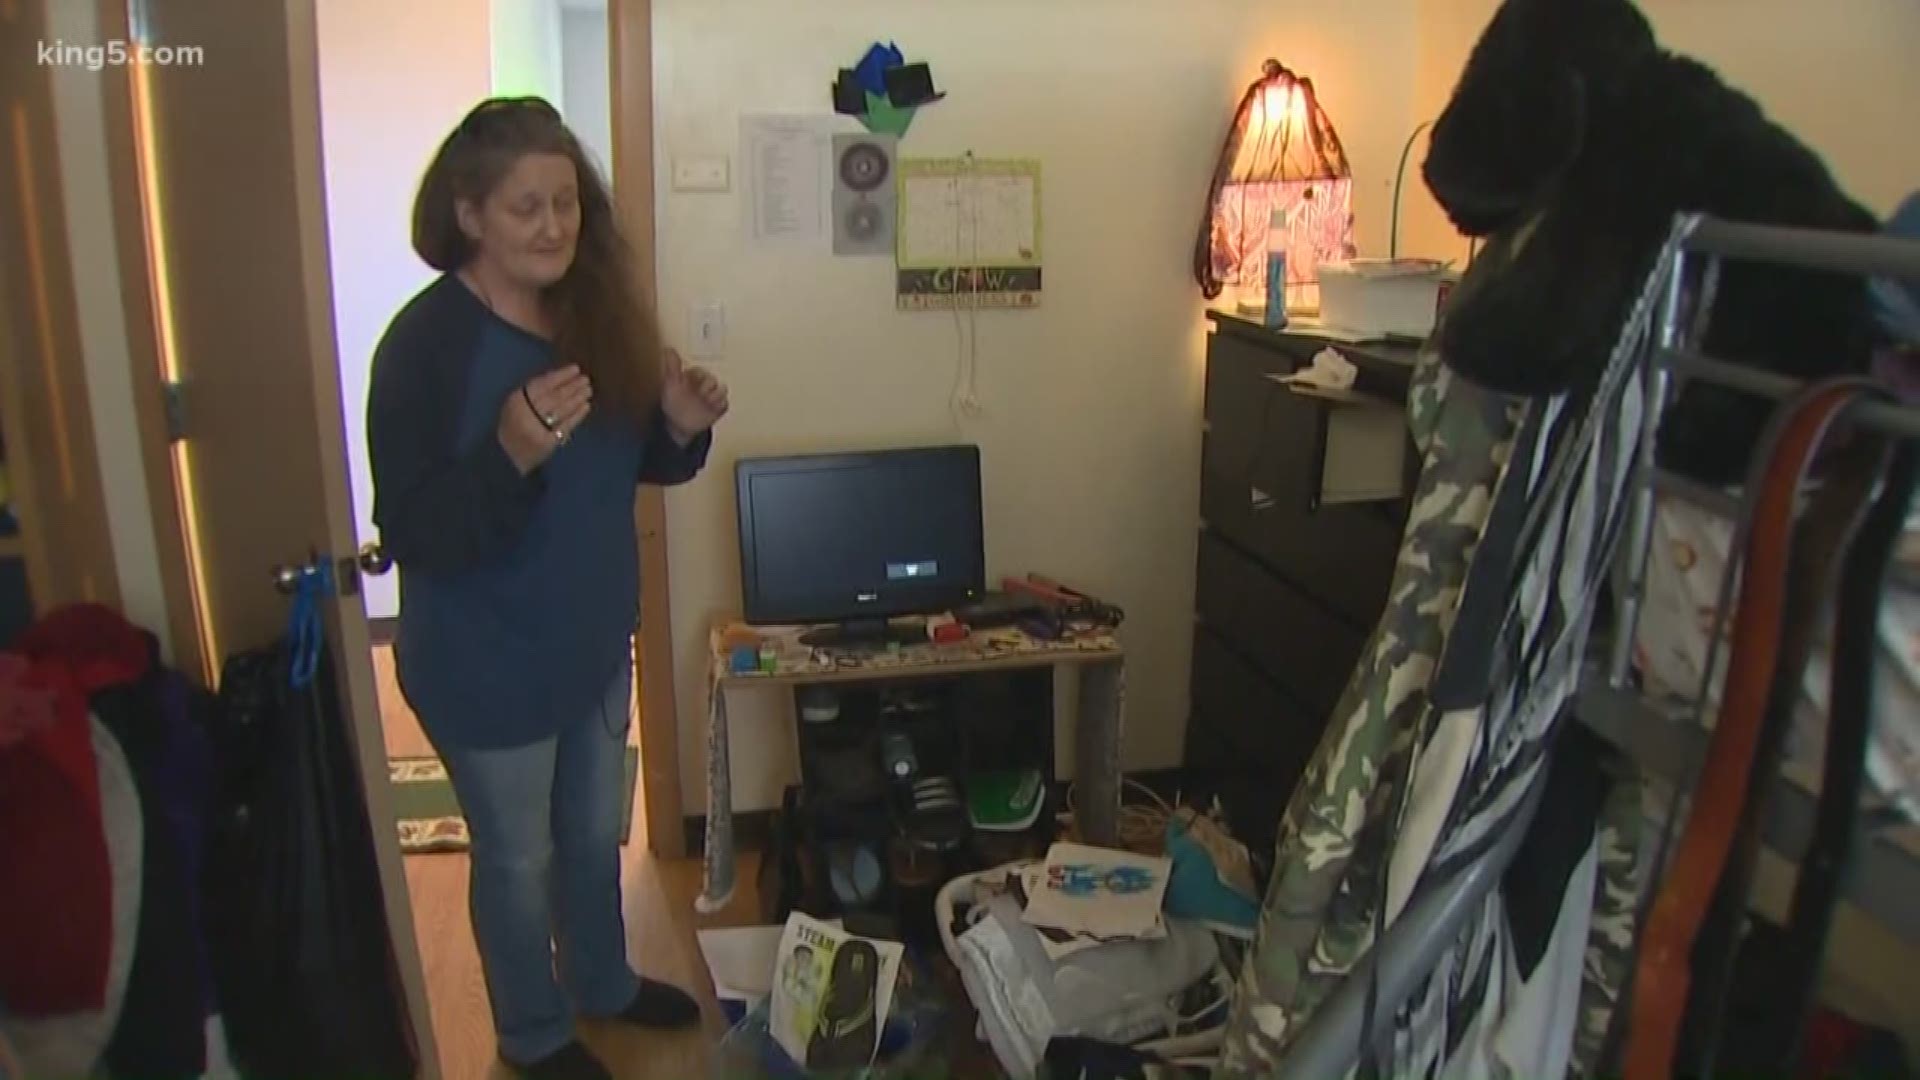 Snohomish County's homeless population continues to grow, according to new data, and it's not just single men or women living without shelter. This year's Point in Time Count found a larger number of families experiencing homelessness. KING 5's Michael Crowe has more on why this year's count showed so many more people experiencing homelessness in the county.